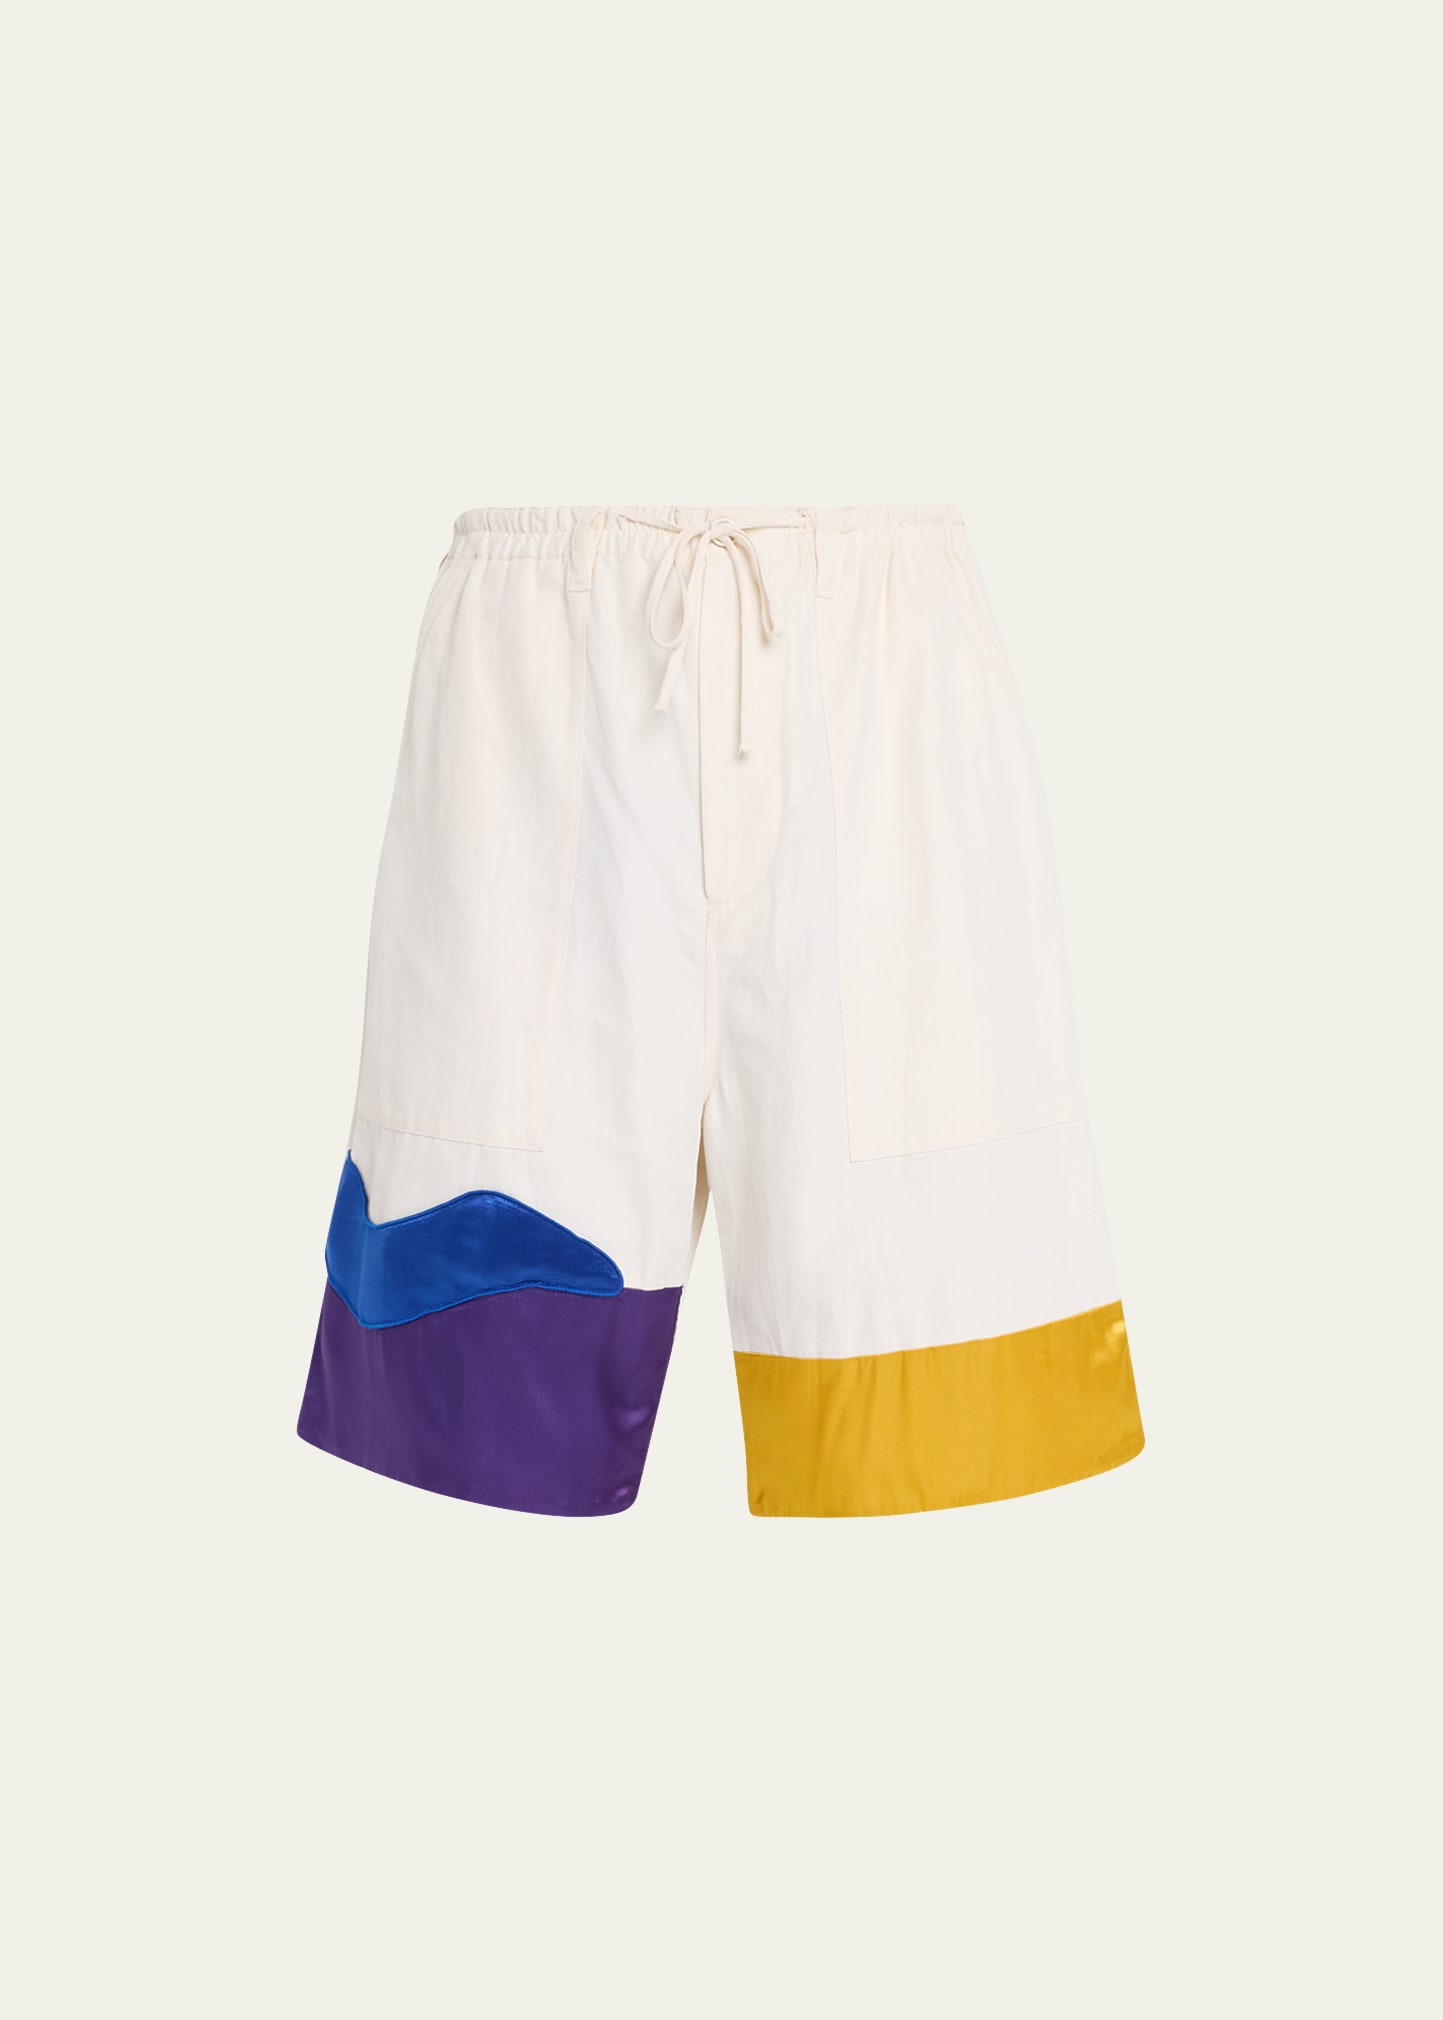 MARNI X NO VACANCY INN MEN'S RELAXED SHORTS WITH PATCHES